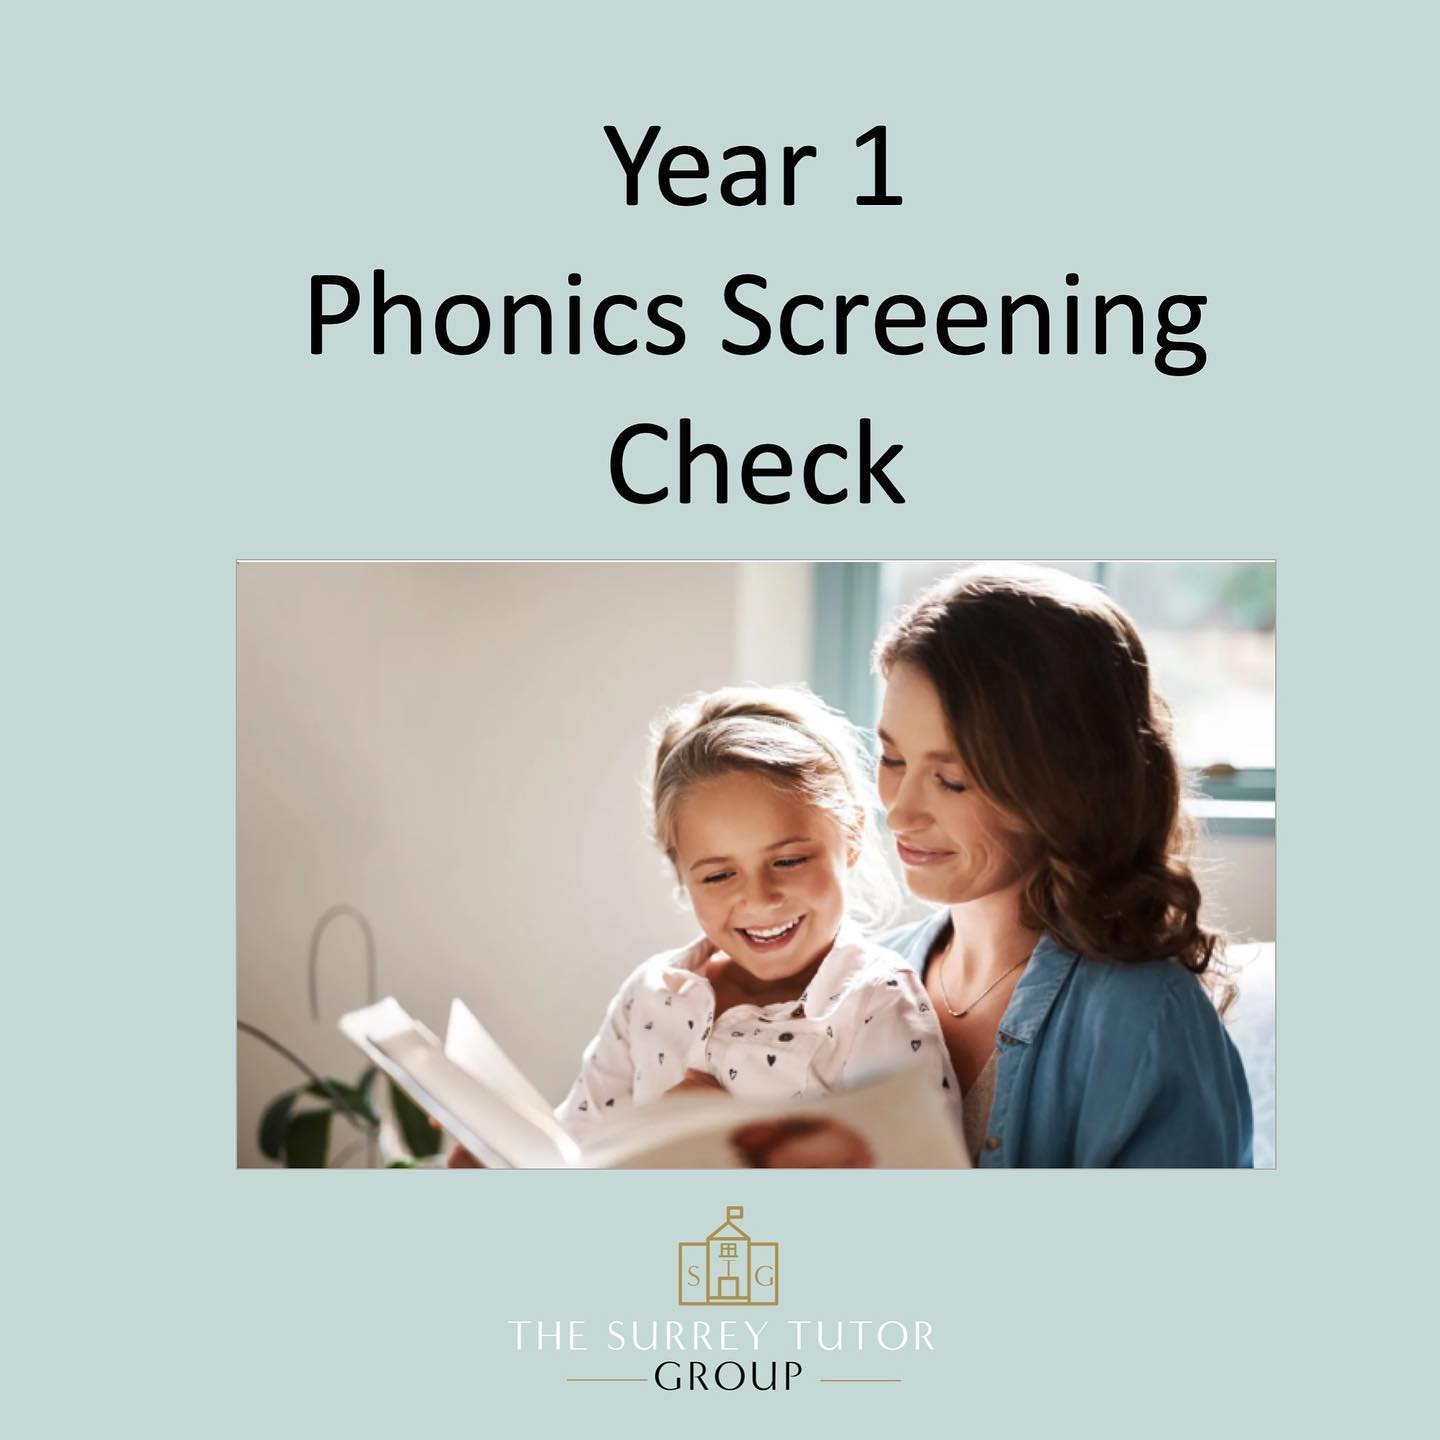 Year 1 Phonics Screening Check.
Some common questions answered to help prepare your child. 📝

www.thesurreytutorgroup.co.uk 

#thesurreytutorgroup #privatuition #phonicsscreening #phonics #pseudowords #yearone #surreymums